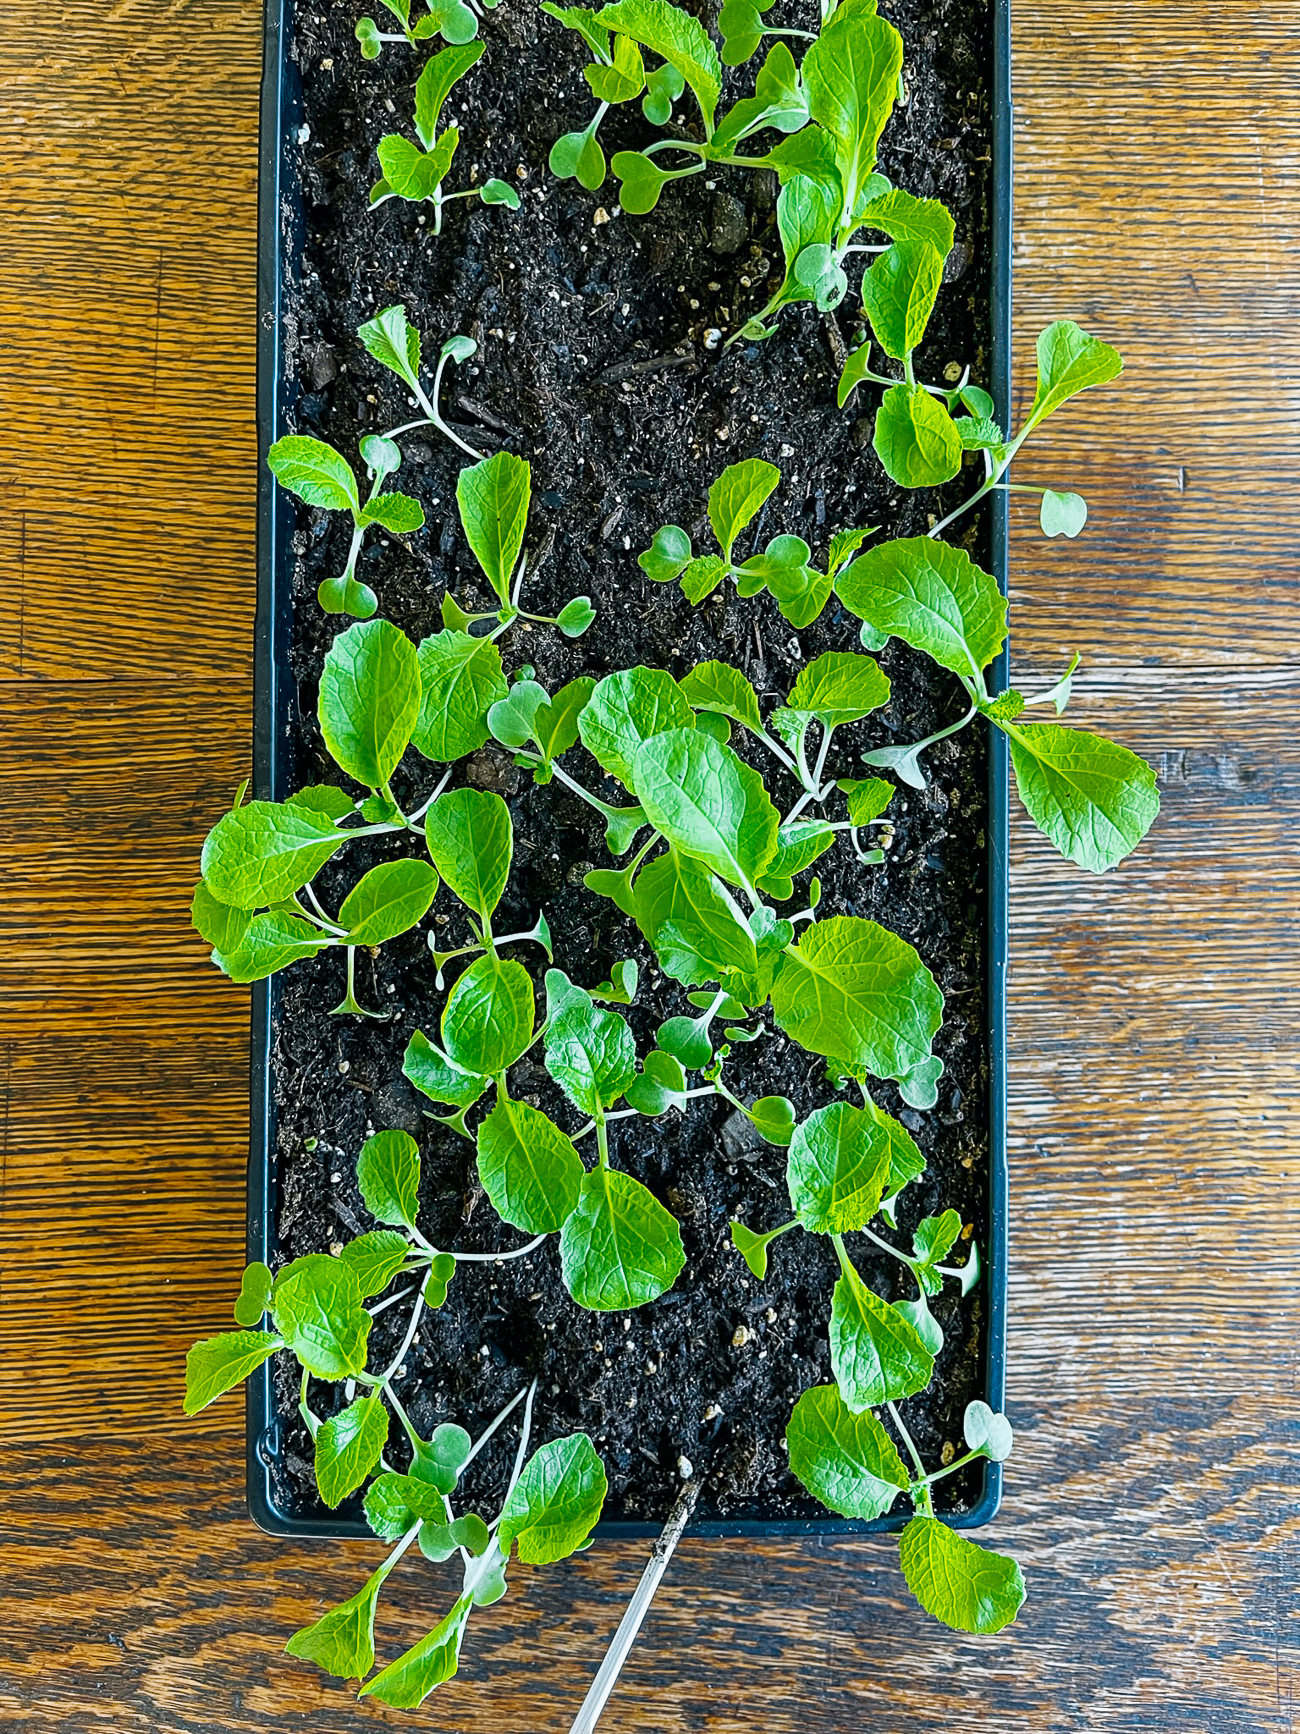 napa cabbage seedlings in seed tray